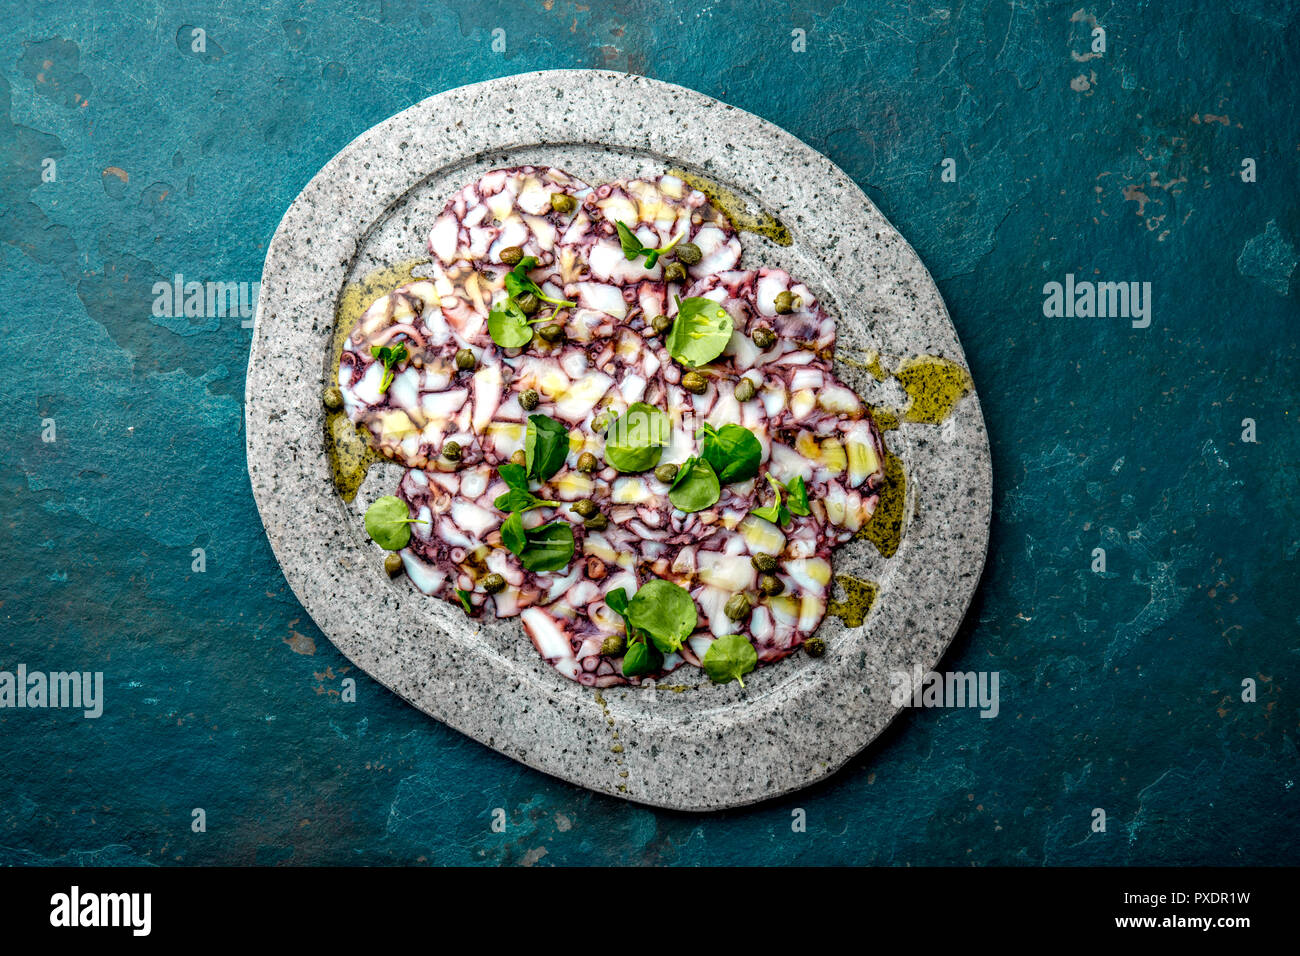 OCTOPUS CARPACCIO. Seafood Raw octopus slices with olive oil, lemon and capers on gray stone plate. Top view. blue background. Stock Photo